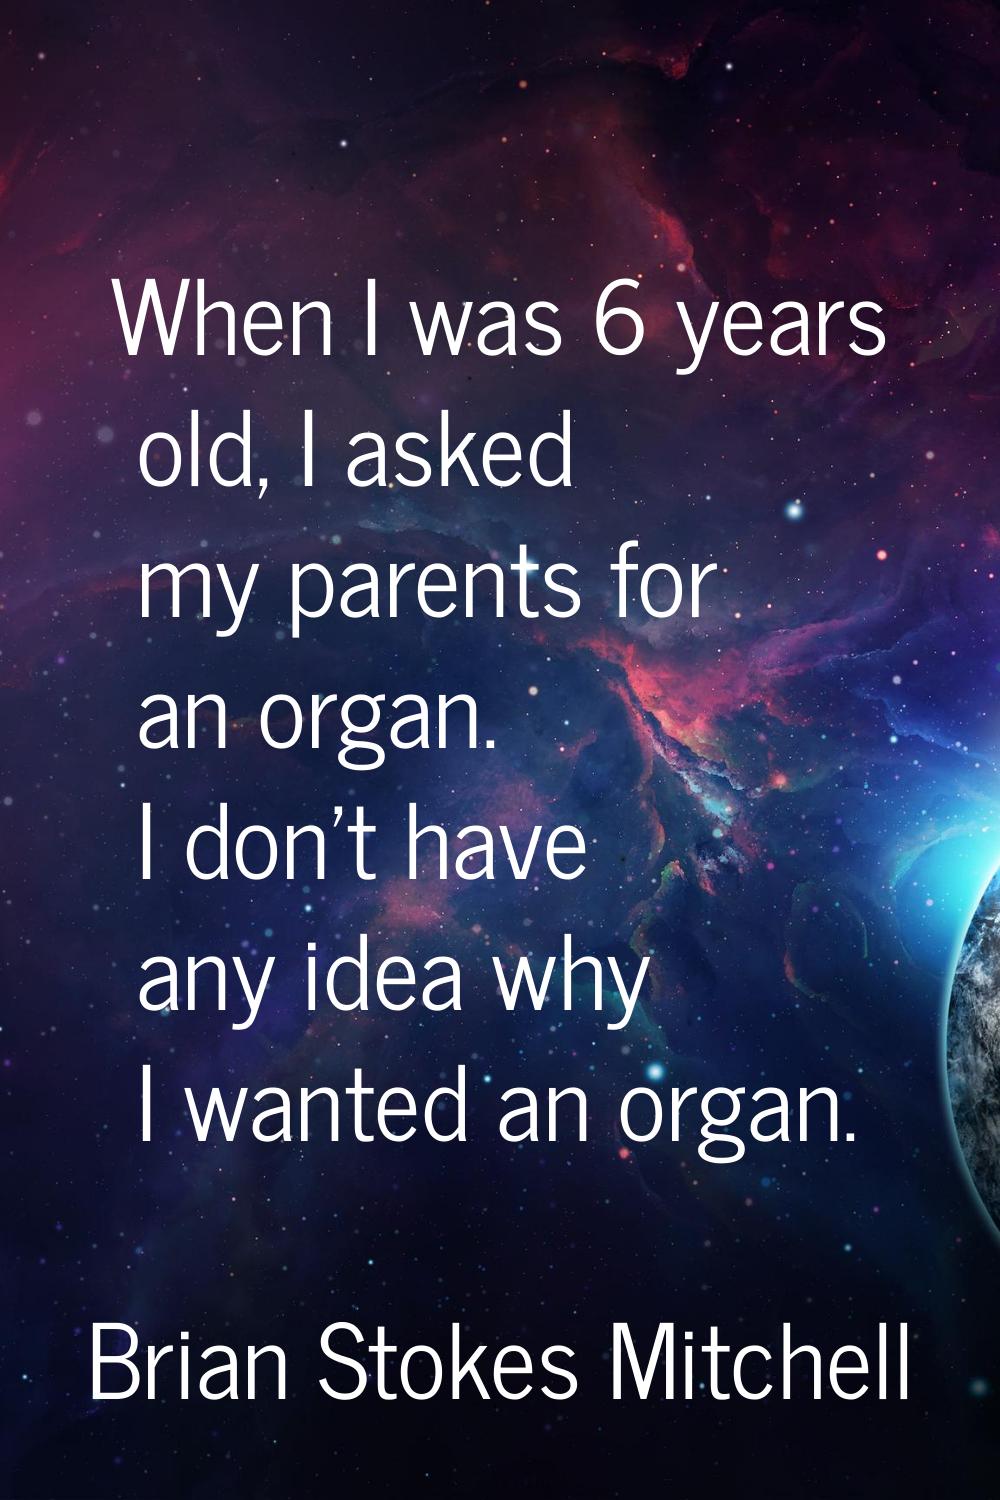 When I was 6 years old, I asked my parents for an organ. I don't have any idea why I wanted an orga